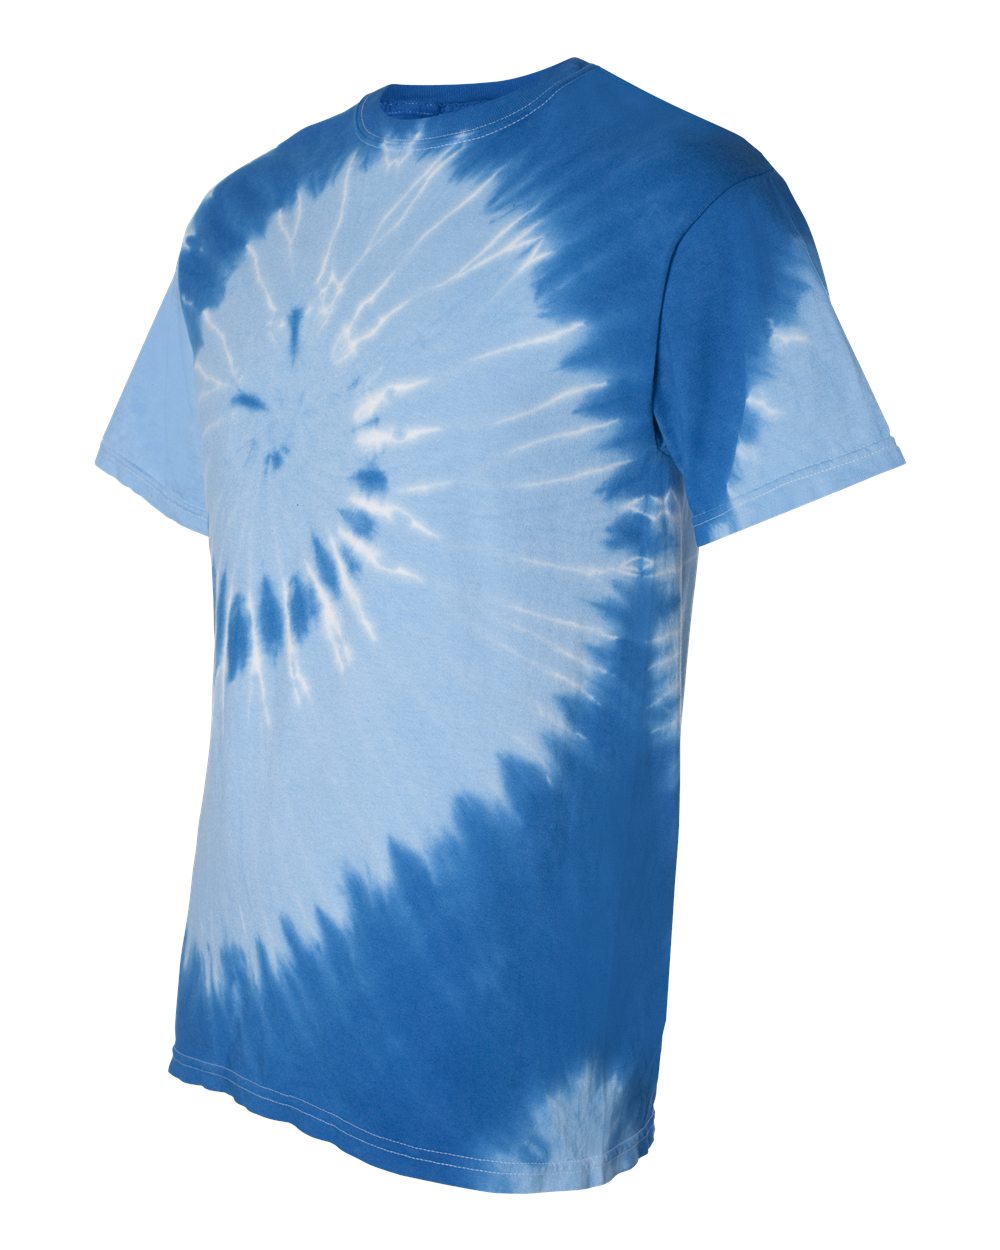 Tie-Dyed 20021 - Tone-on-Tone Spiral T-Shirt